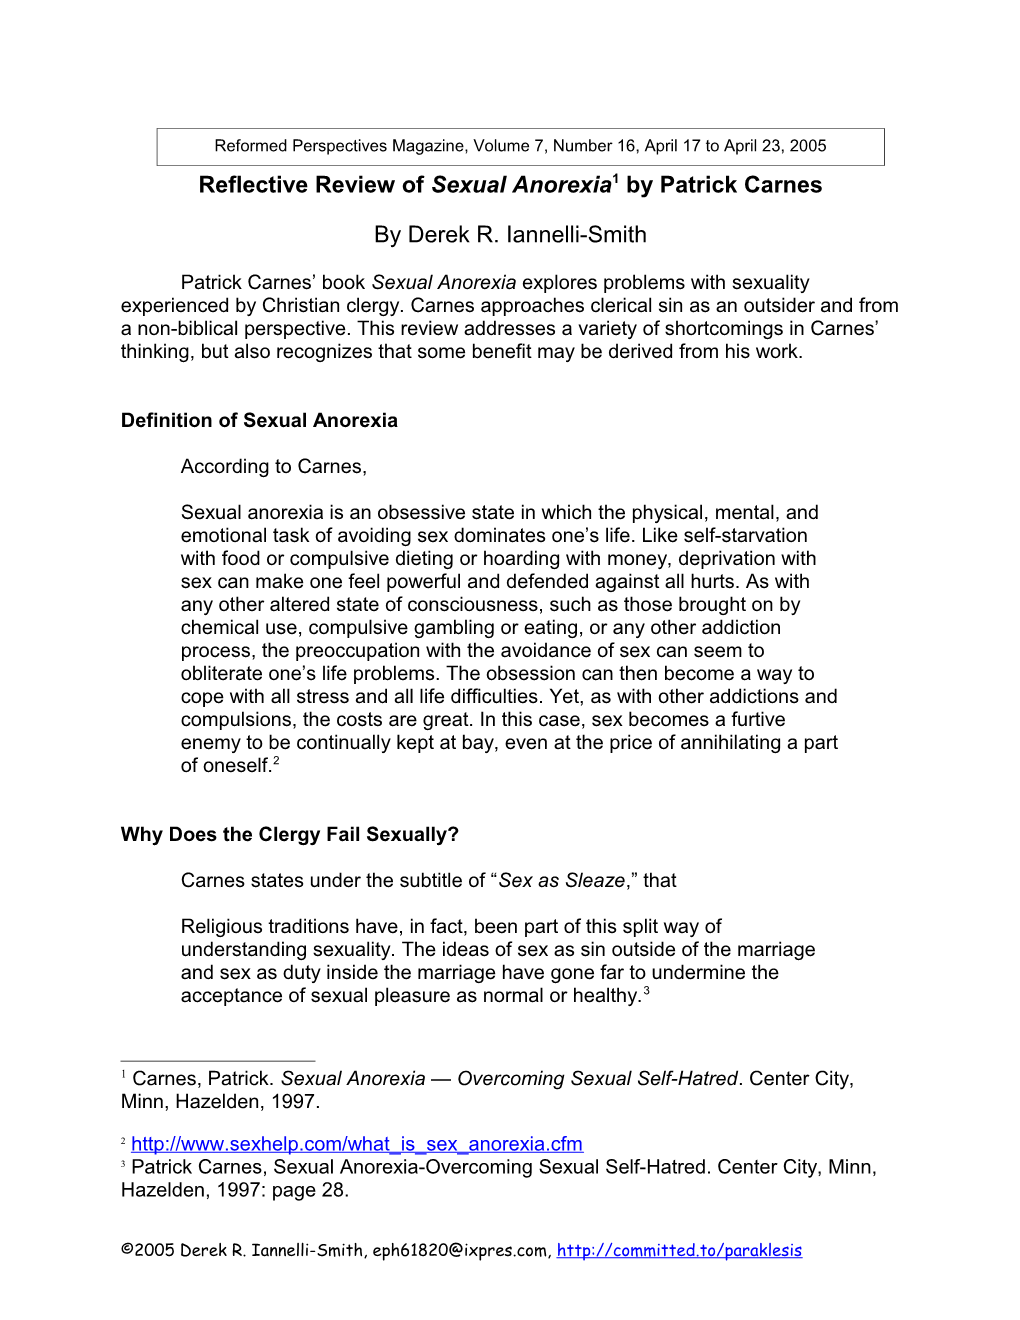 Reflective Review of Sexual Anorexia 1 by Patrick Carnes